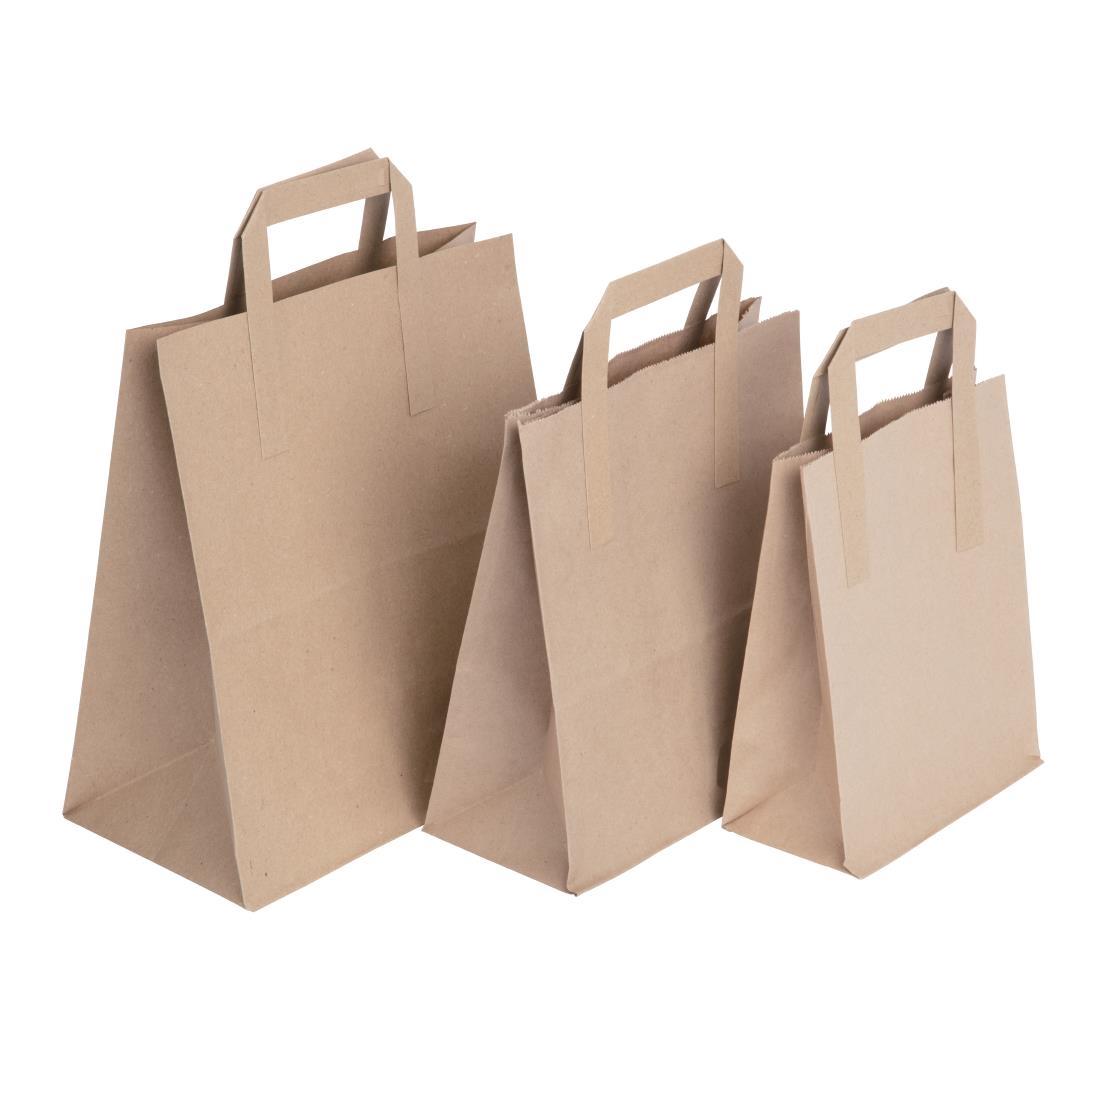 Fiesta Compostable Recycled Brown Paper Carrier Bags Small (Pack of 250) - CS351  - 5